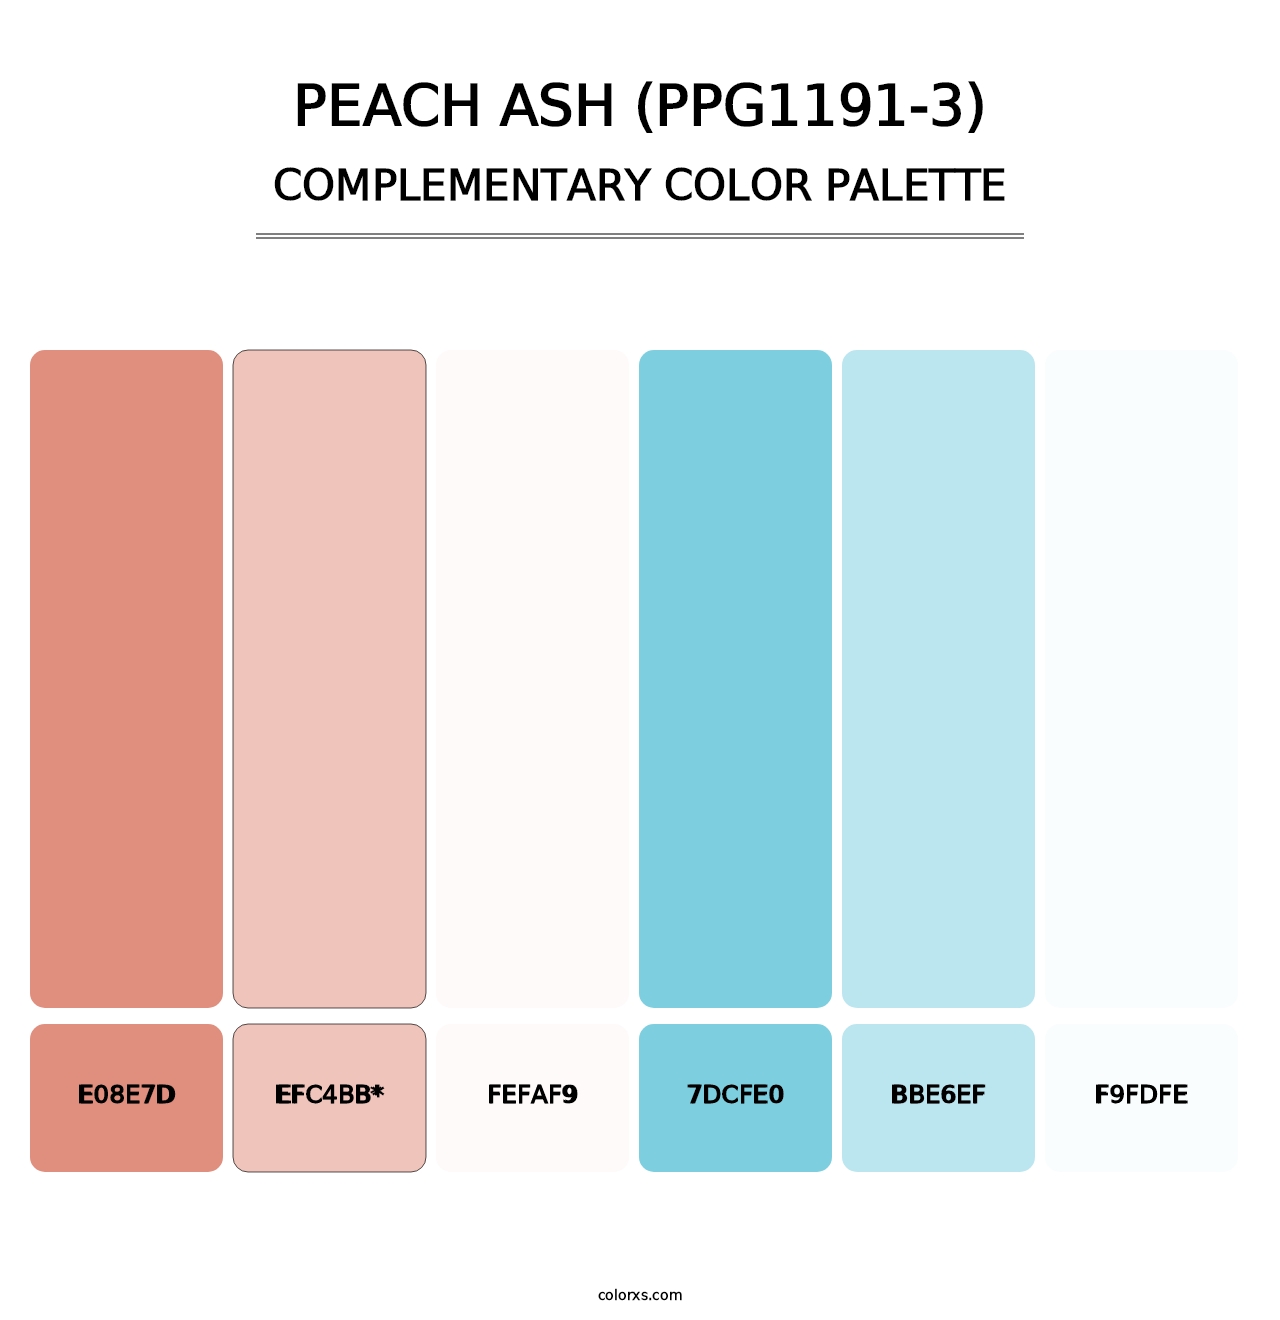 Peach Ash (PPG1191-3) - Complementary Color Palette